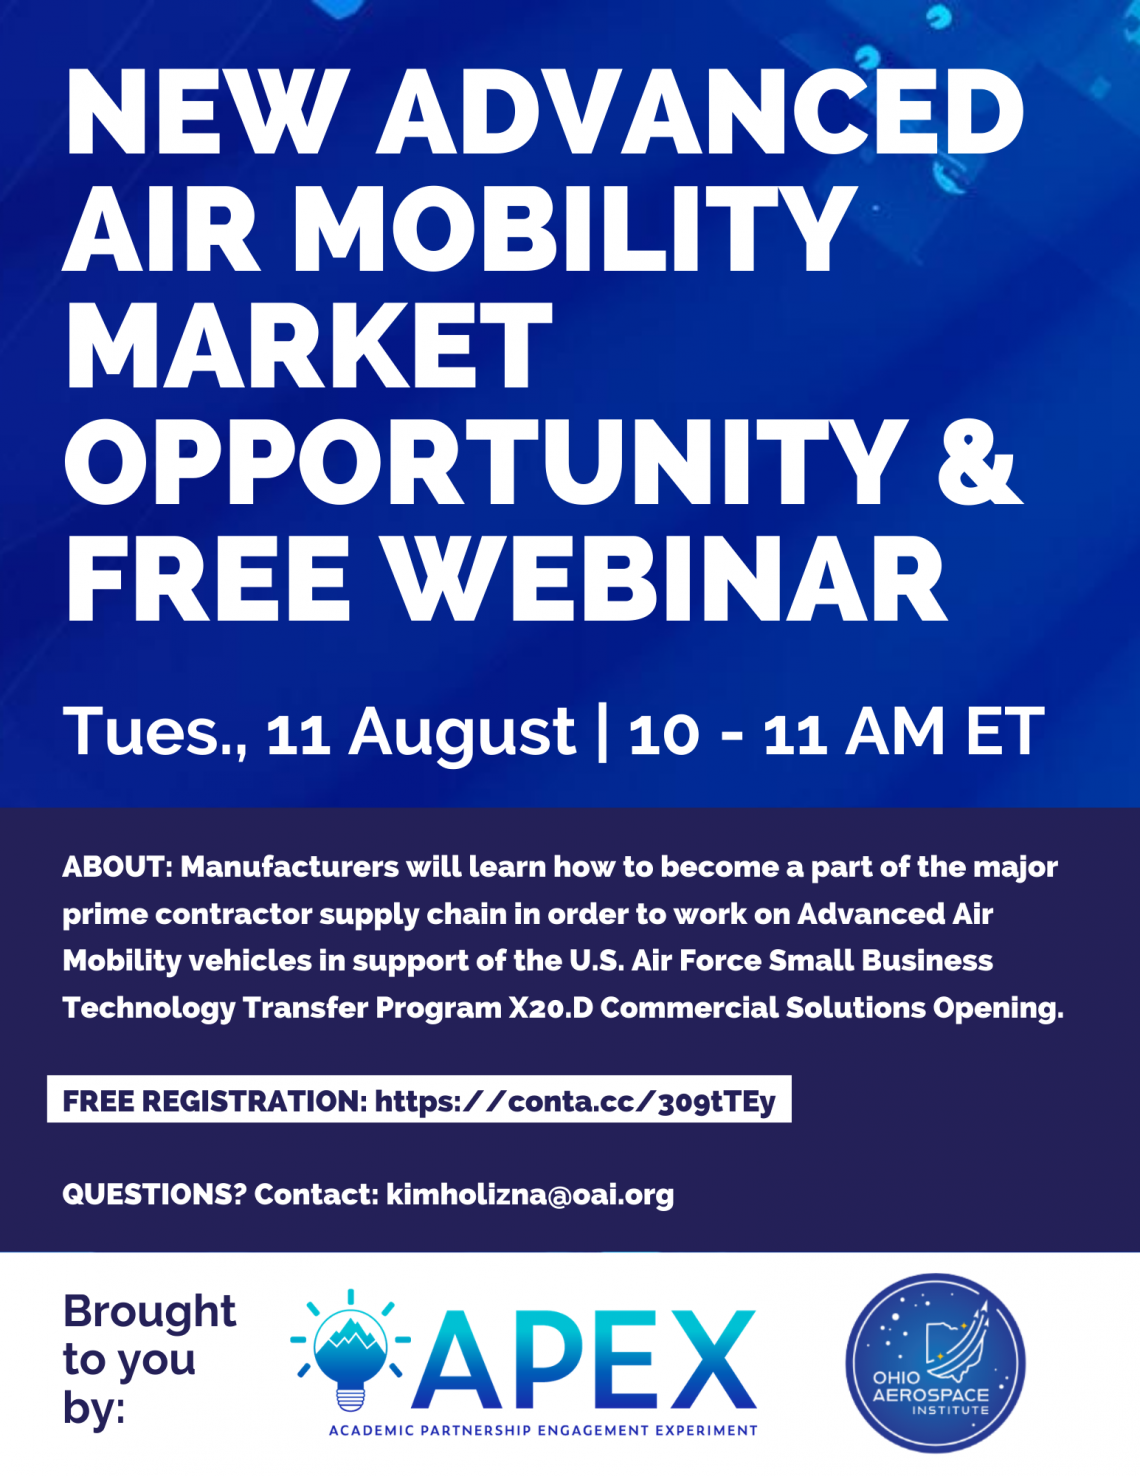 New Advanced Air Mobility Market Opportunity & Free Webinar